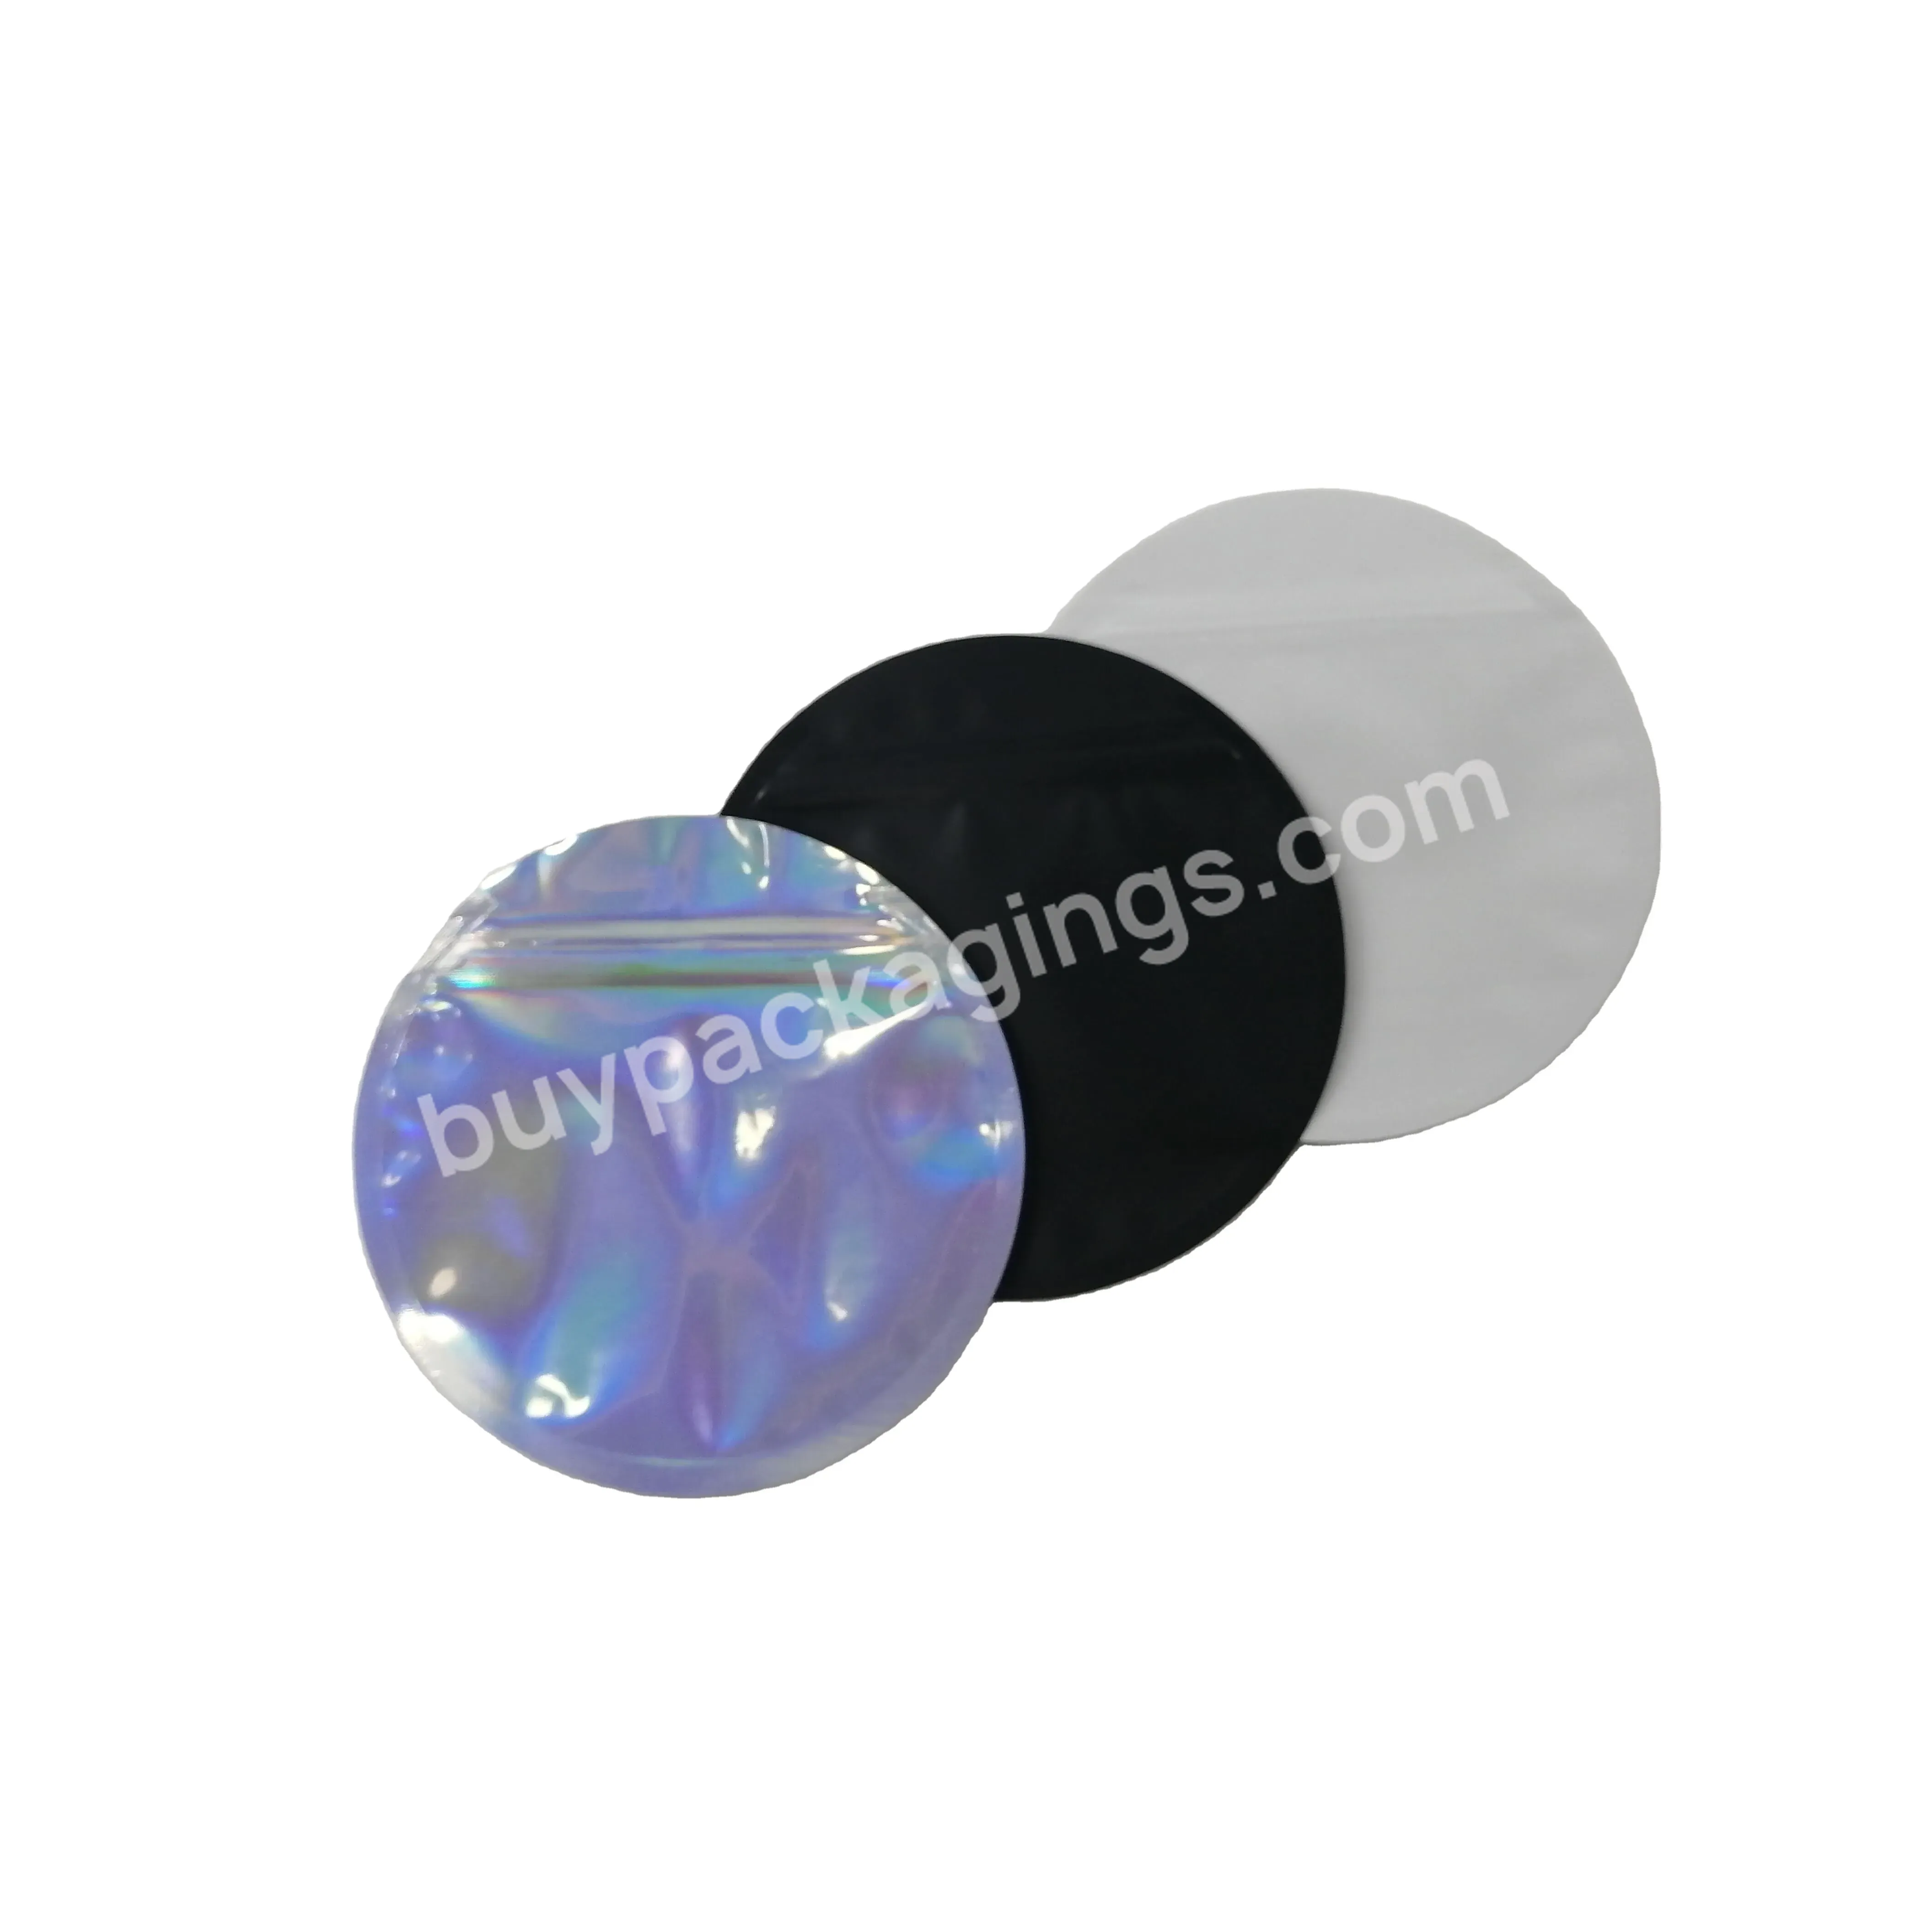 5 Inches Round Mylar Bags Holographic Circle Shape Bag Matte White Plastic Pouch Matte Black Round Die Cut Shaped Bags